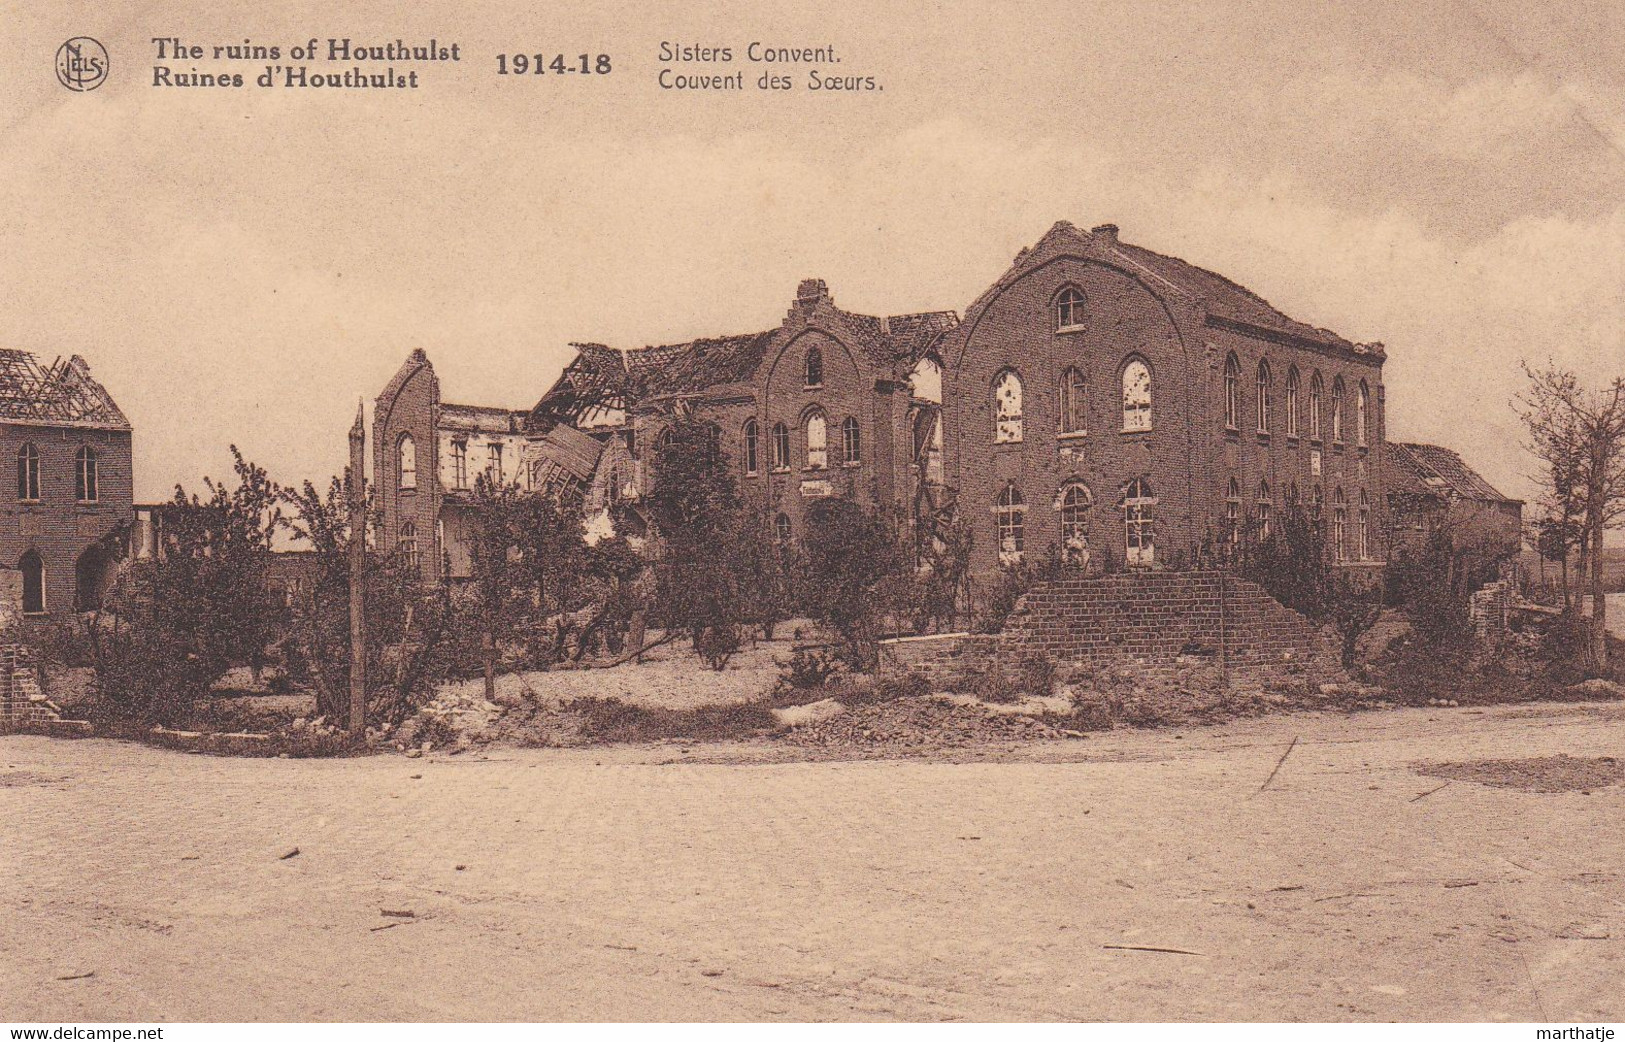 The Ruins Of Houthulst - 1914-18 - Sisters Convent - Ruines D'Houthulst - Couvent Des Soeurs - Houthulst